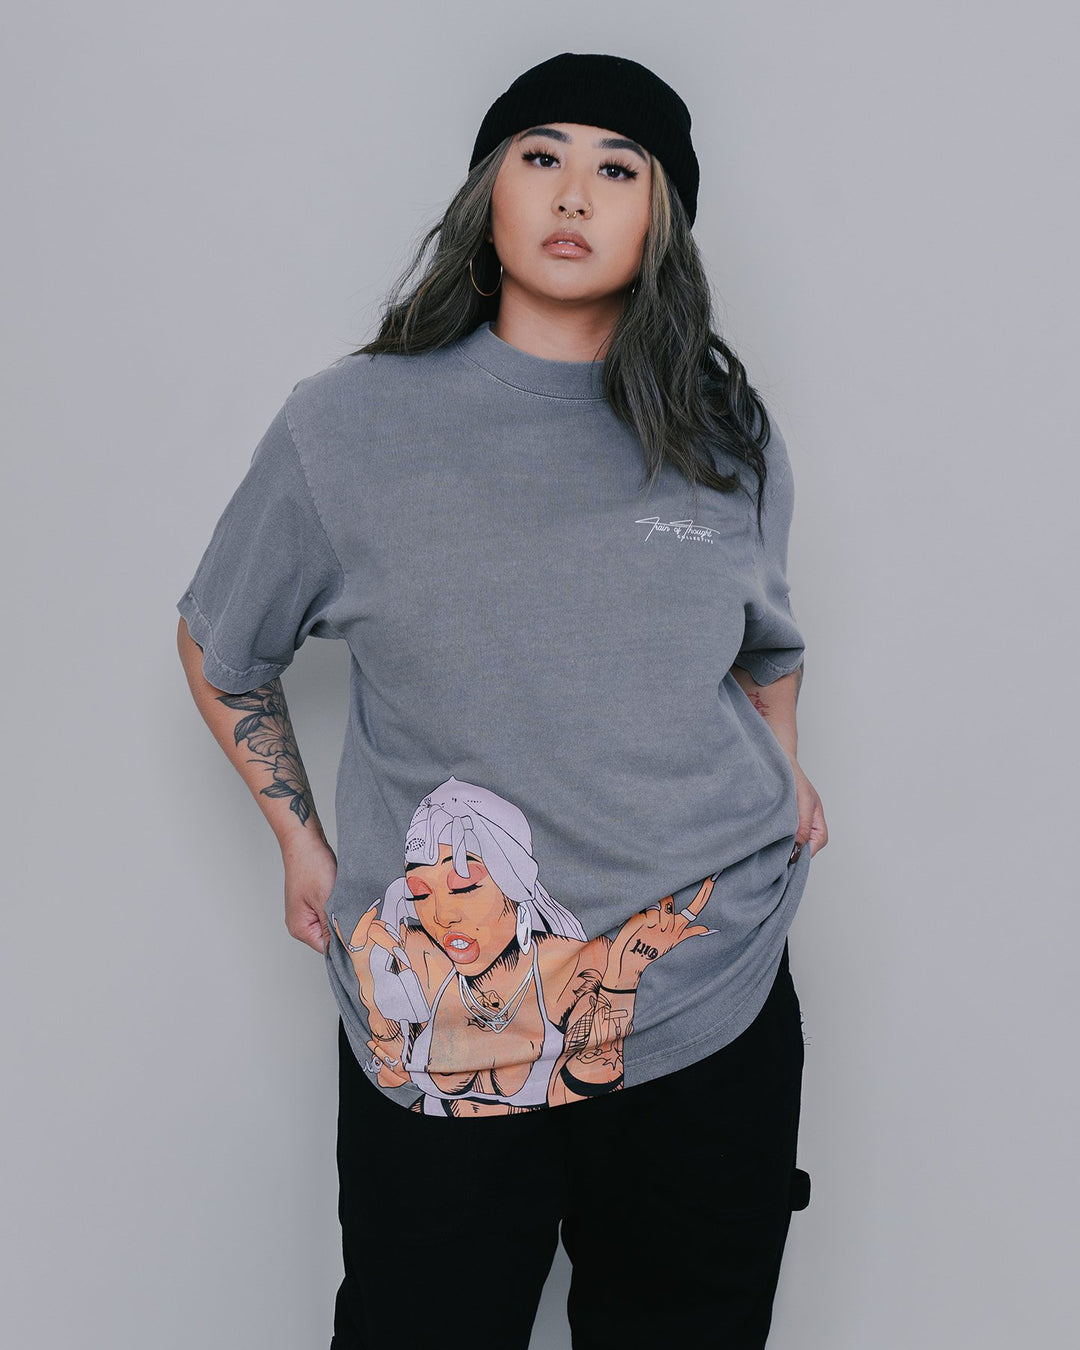 Summer Big Face Oversized Cement Tee - trainofthoughtcollective